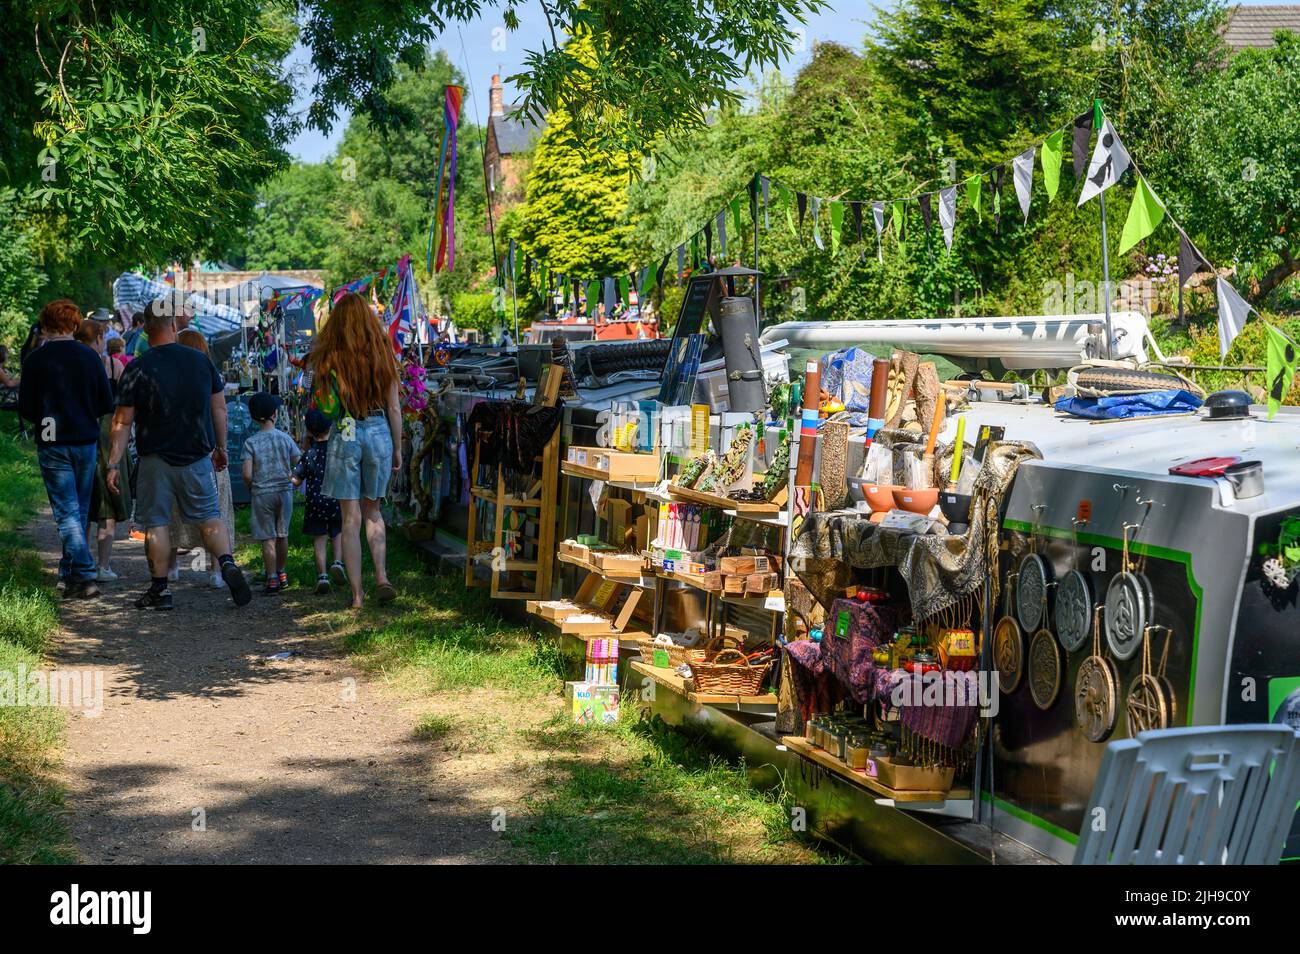 Visitors enjoying a canal festival in the village of Gnosall in Staffordshire during a heatwave. Stock Photo